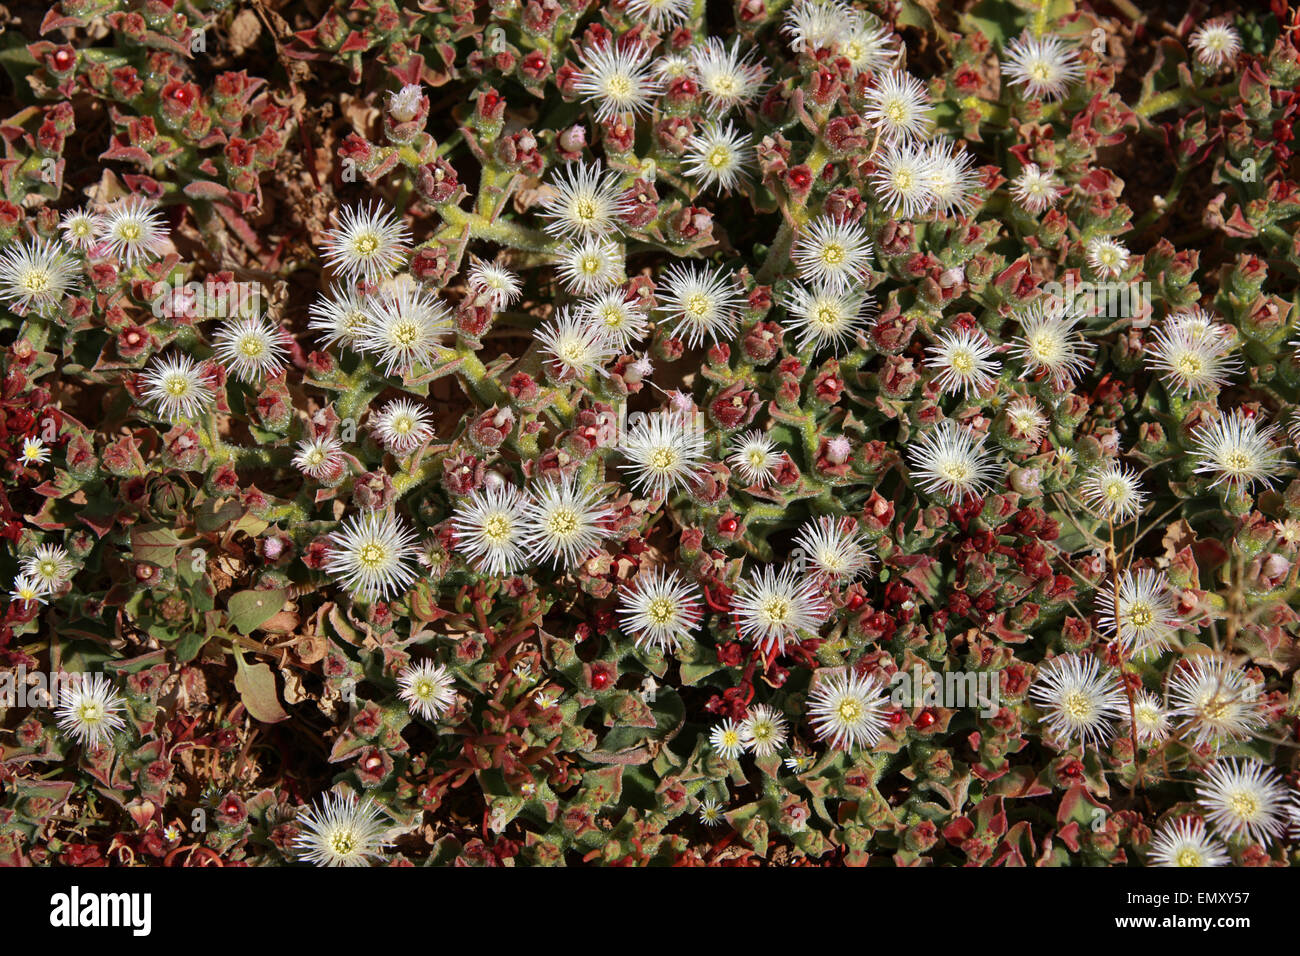 Ice Plant, Mesembryanthemum crystallinum, Aizoaceae. Fuerteventura. A common plant in the Canary Islands. Stock Photo